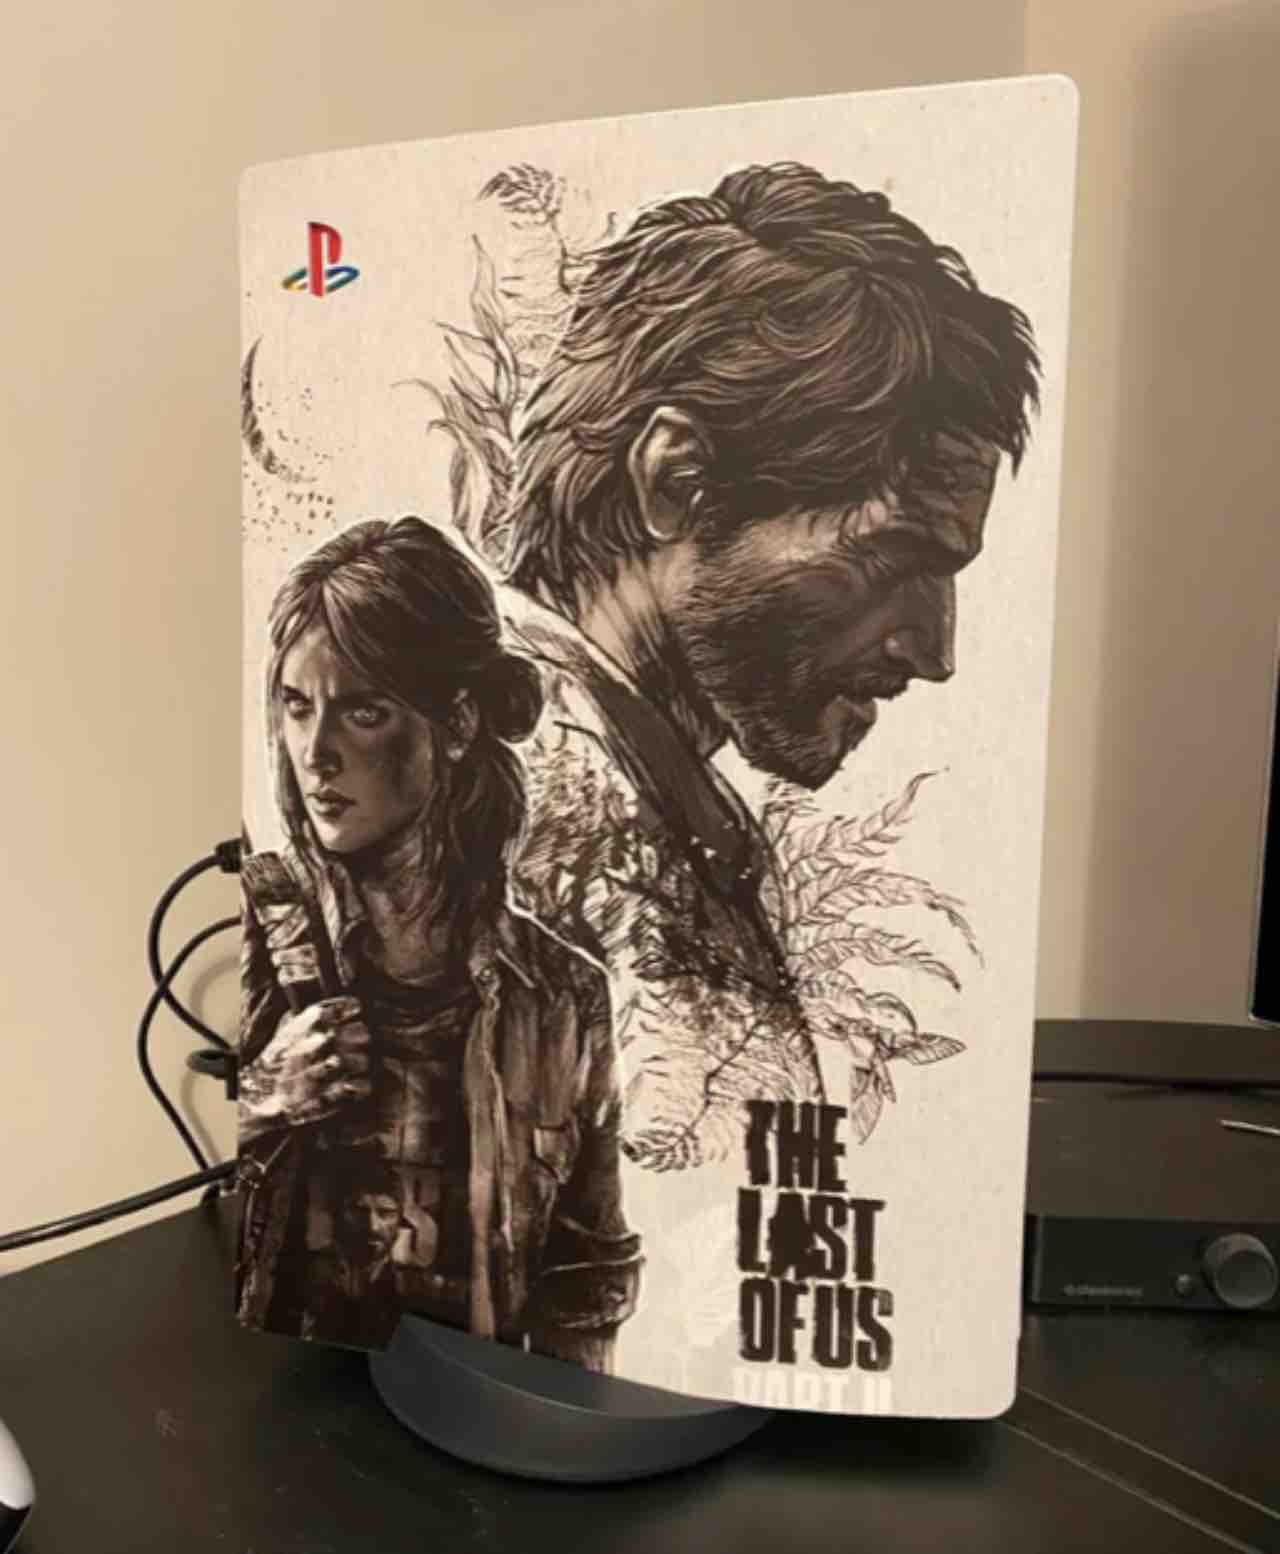 ps5 the last of us